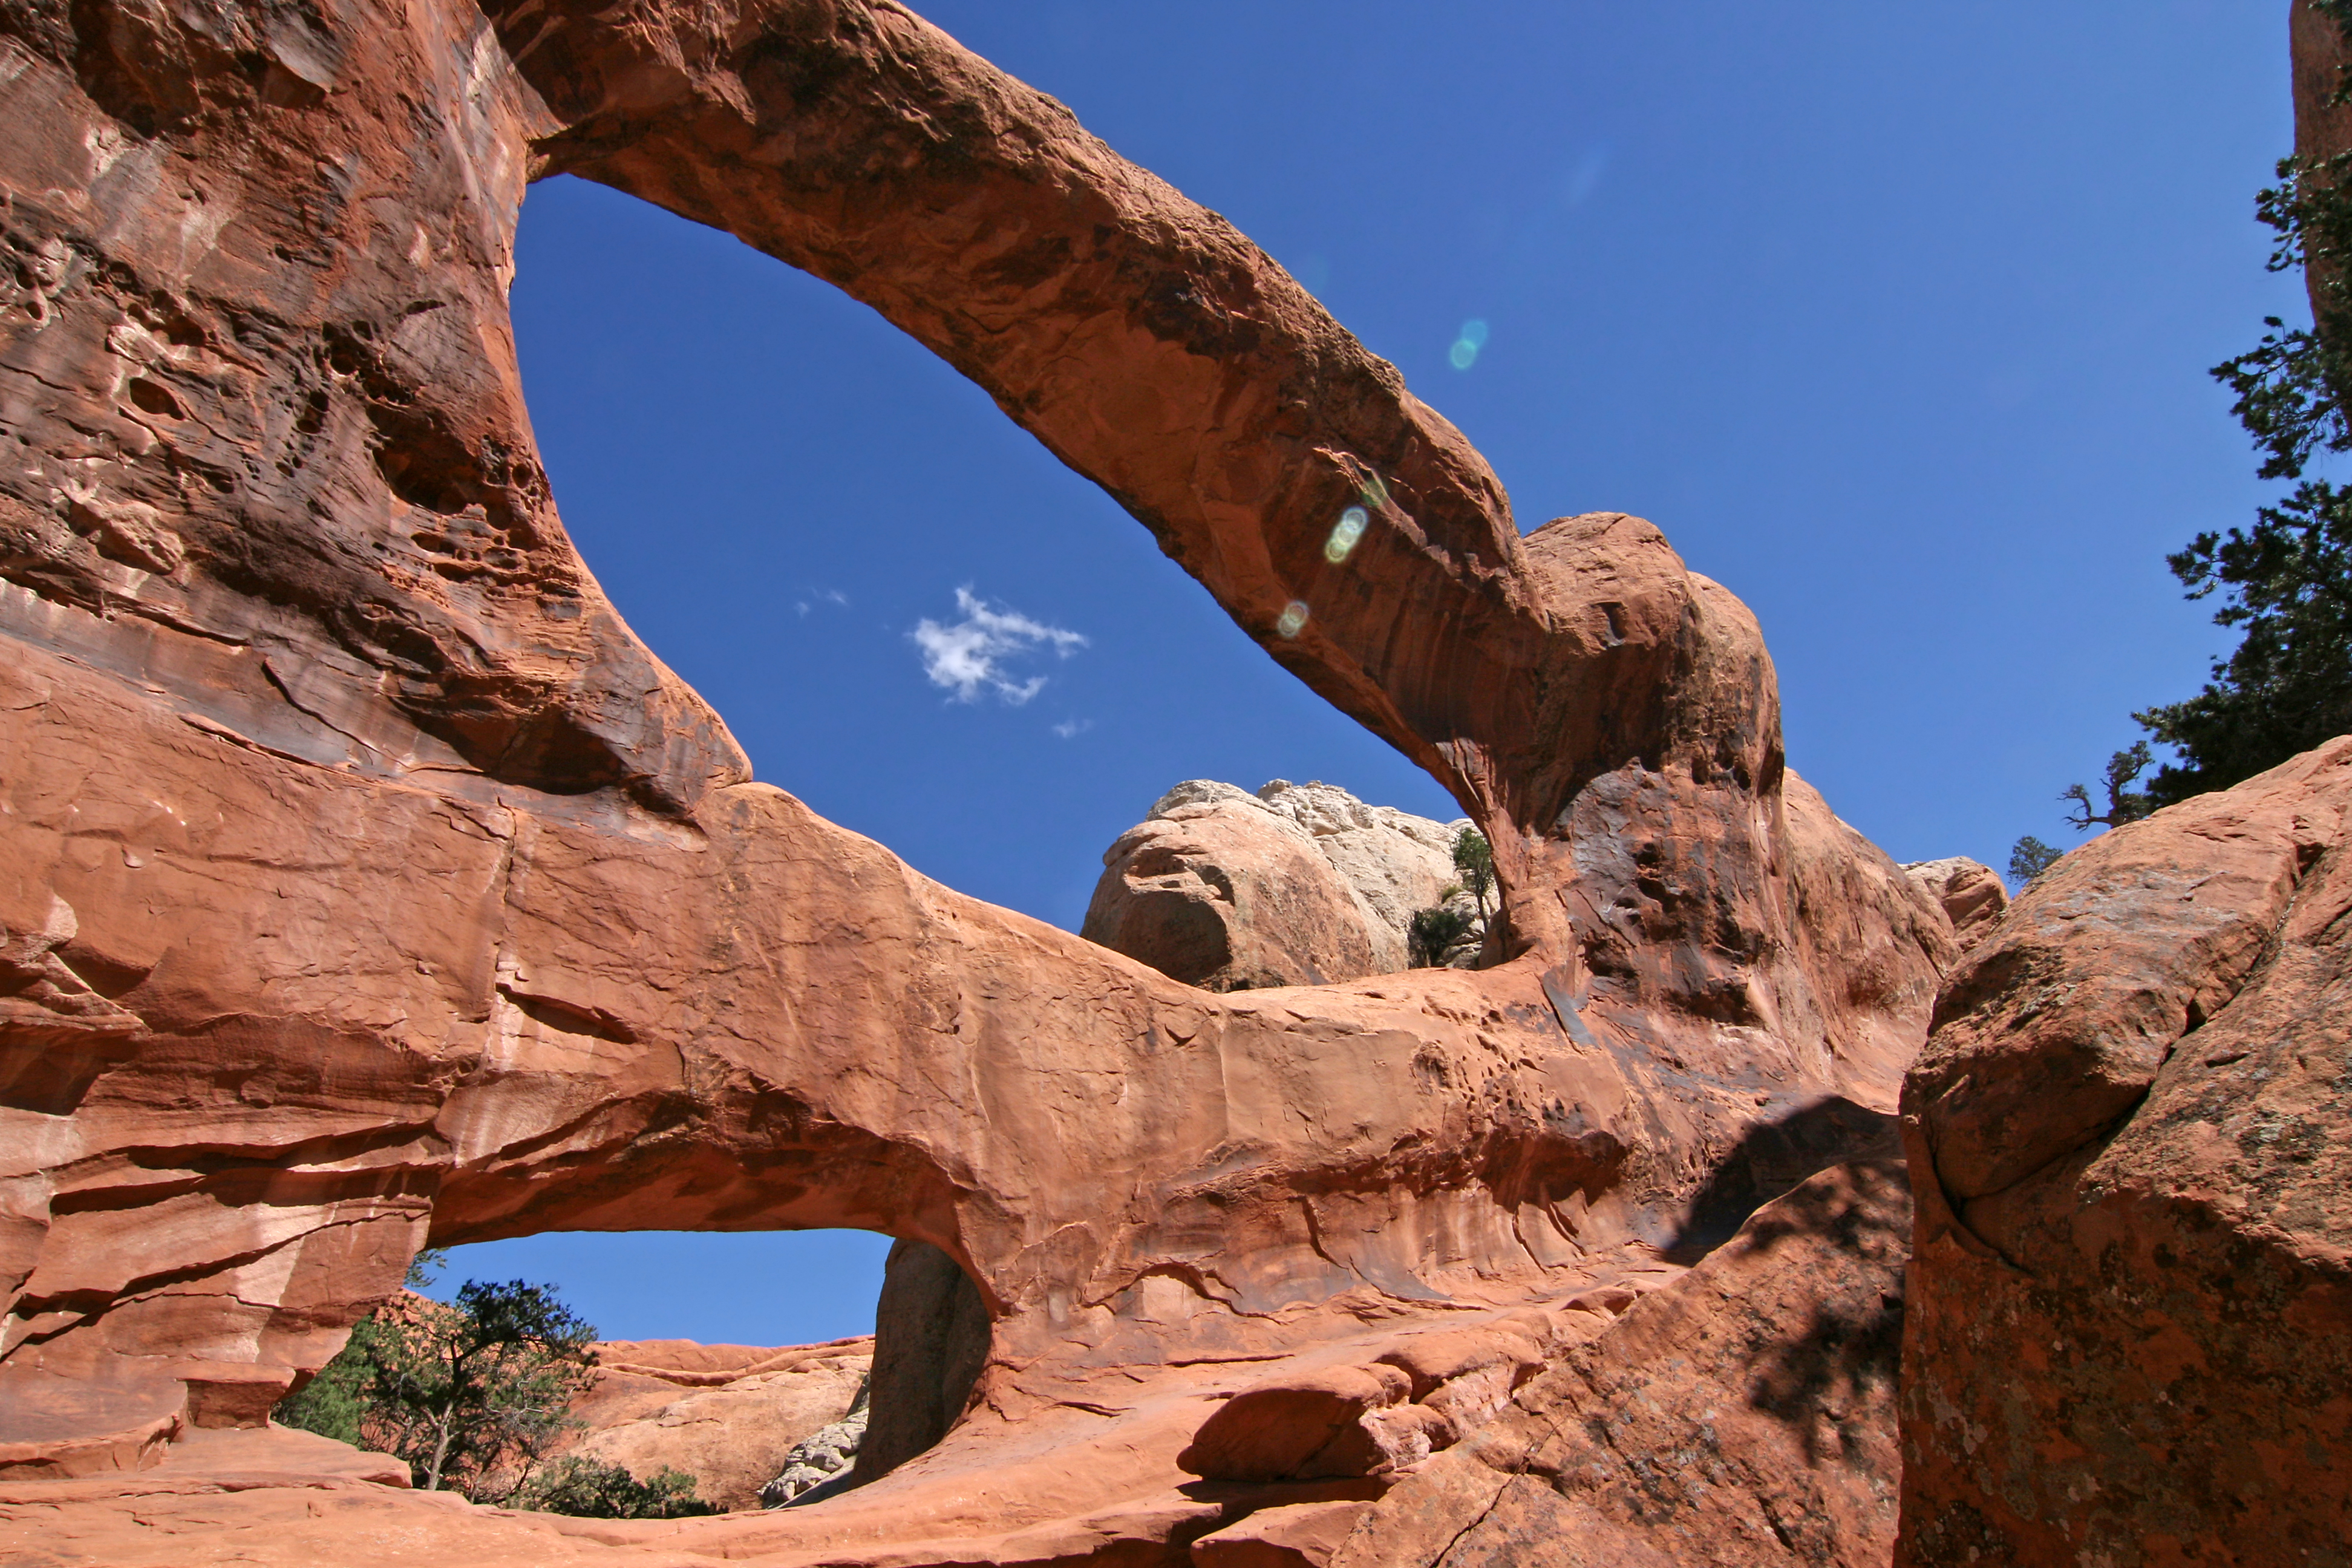 File:Double-O-Arch Arches National Park.jpg - Wikimedia Commons